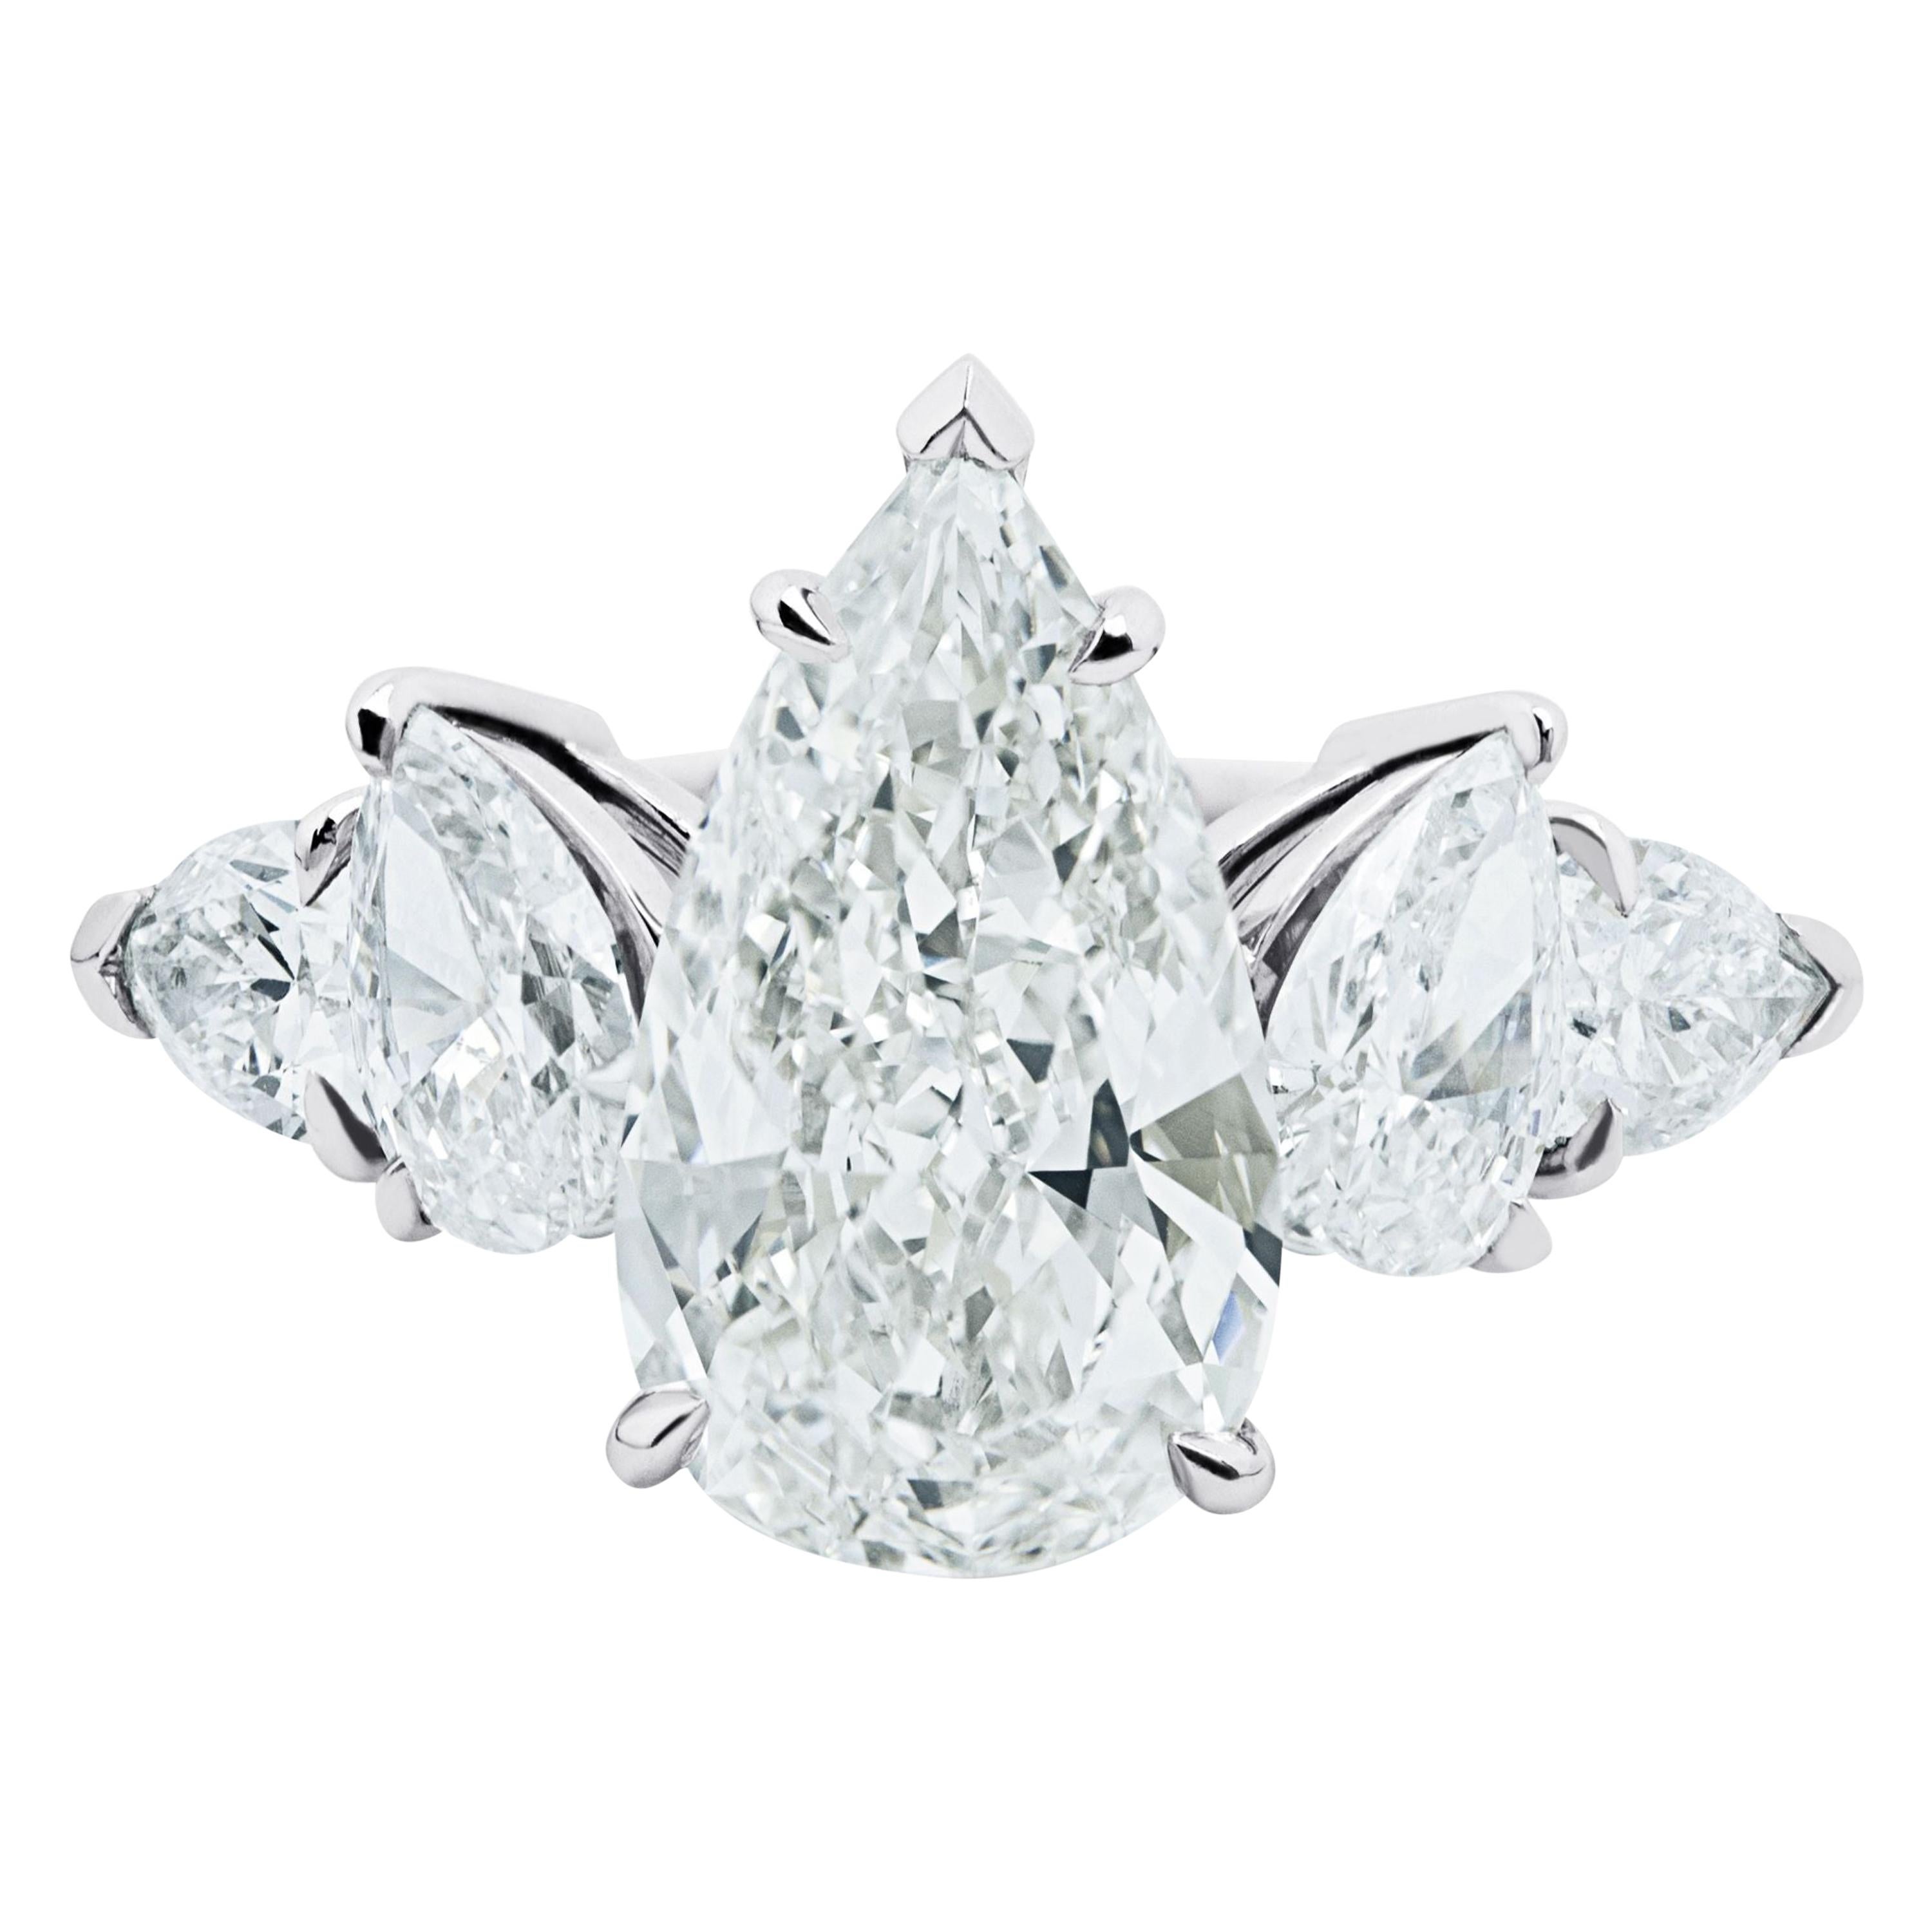 Ethonica GIA Certified Pear Diamond Ring in Platinum